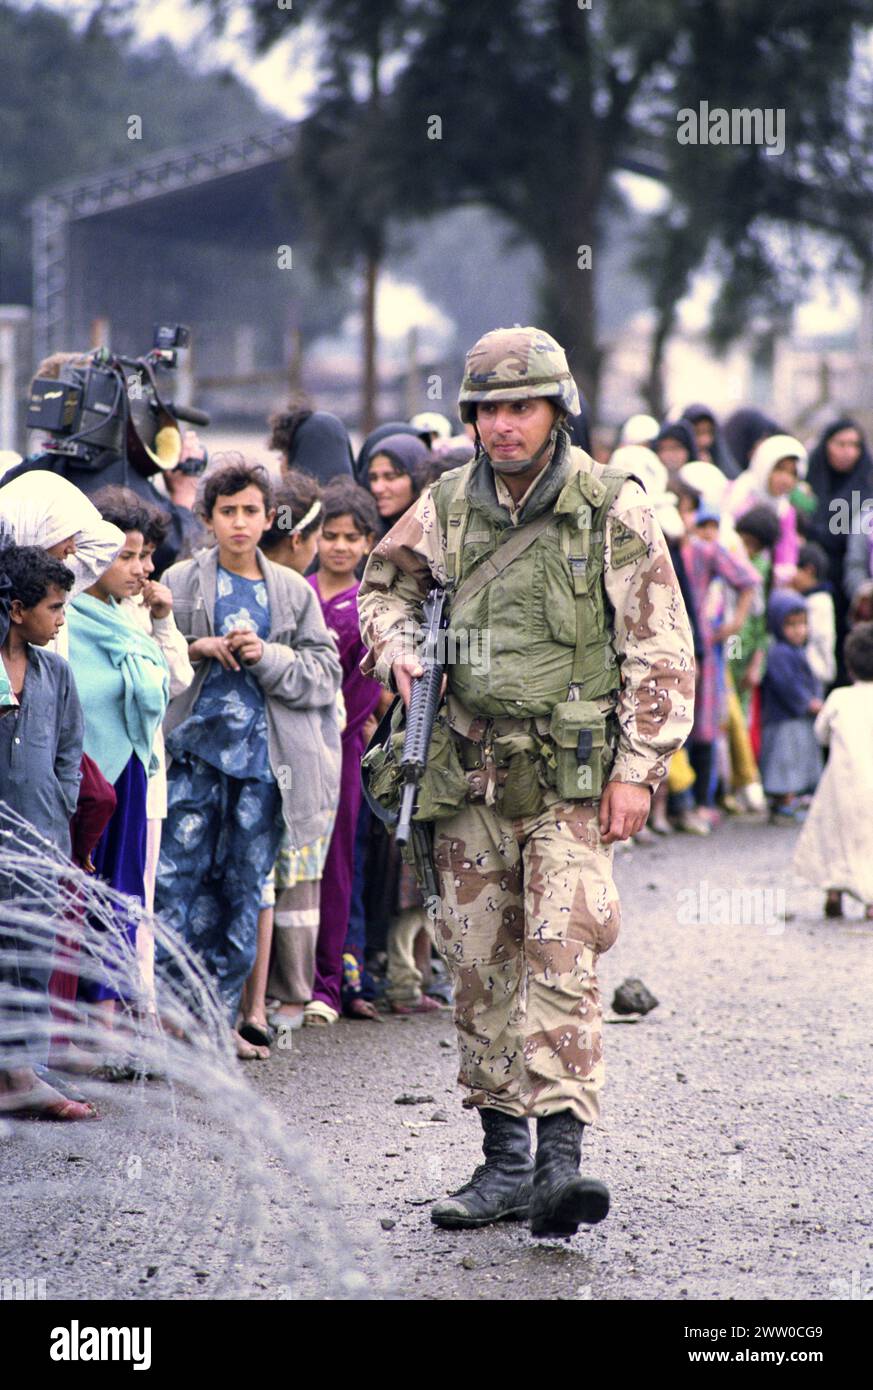 23rd March 1991 A U.S. Army soldier of the 3rd Armored 'Spearhead' Division guards an orderly line of displaced Iraqis, queuing for food and drink near Safwan in southern Iraq. Stock Photo